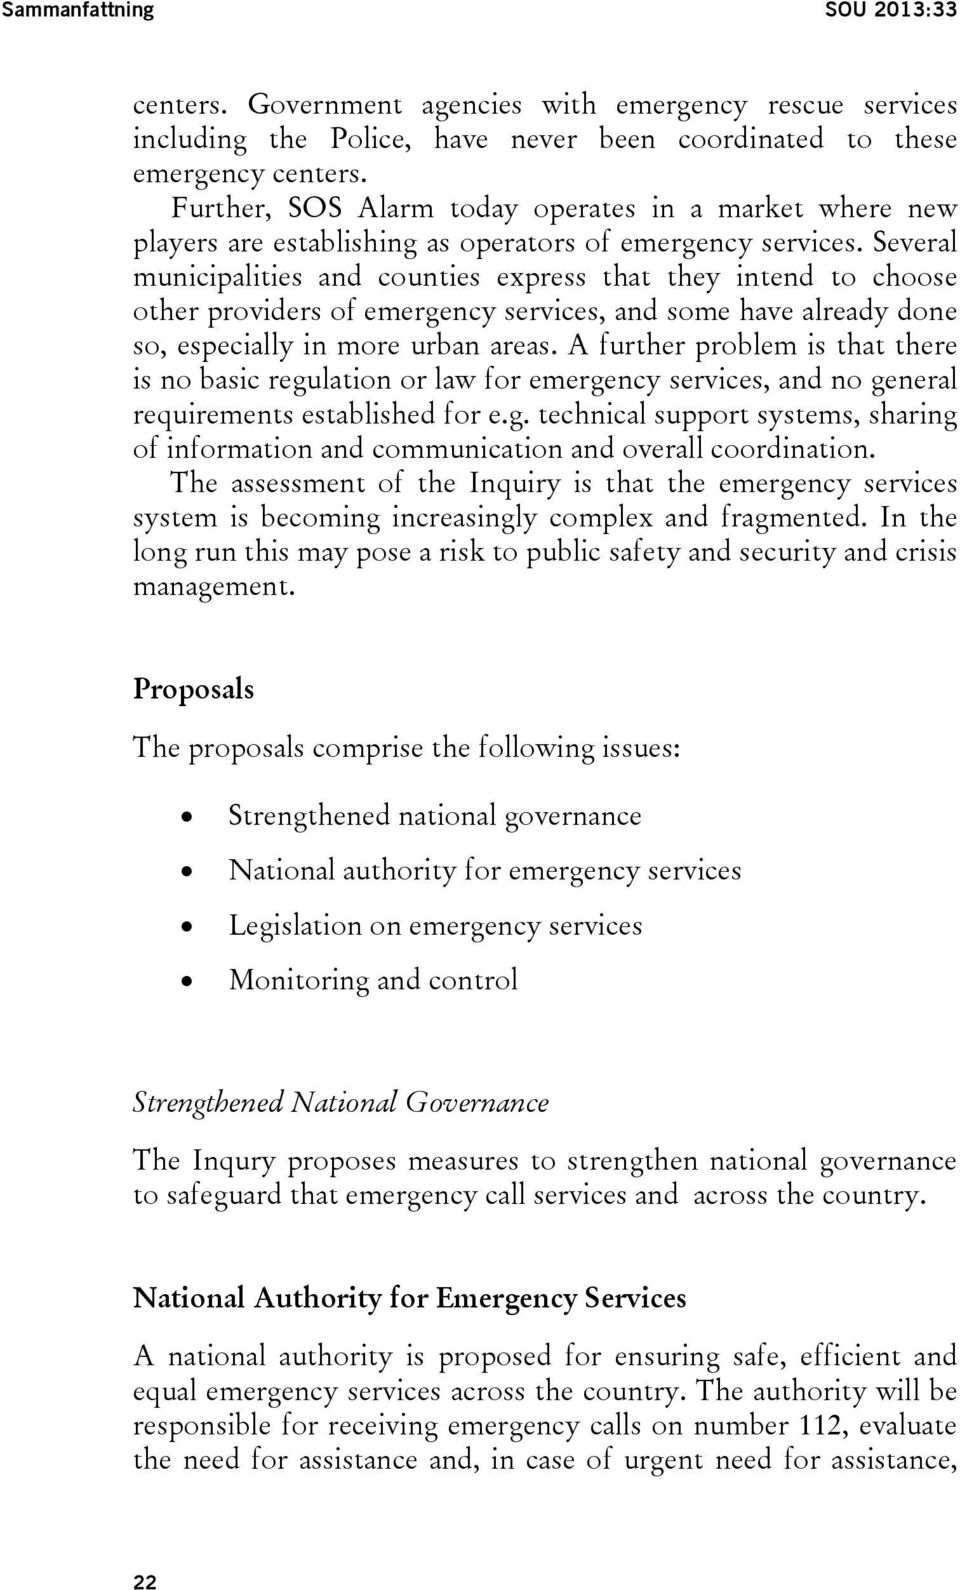 Several municipalities and counties express that they intend to choose other providers of emergency services, and some have already done so, especially in more urban areas.